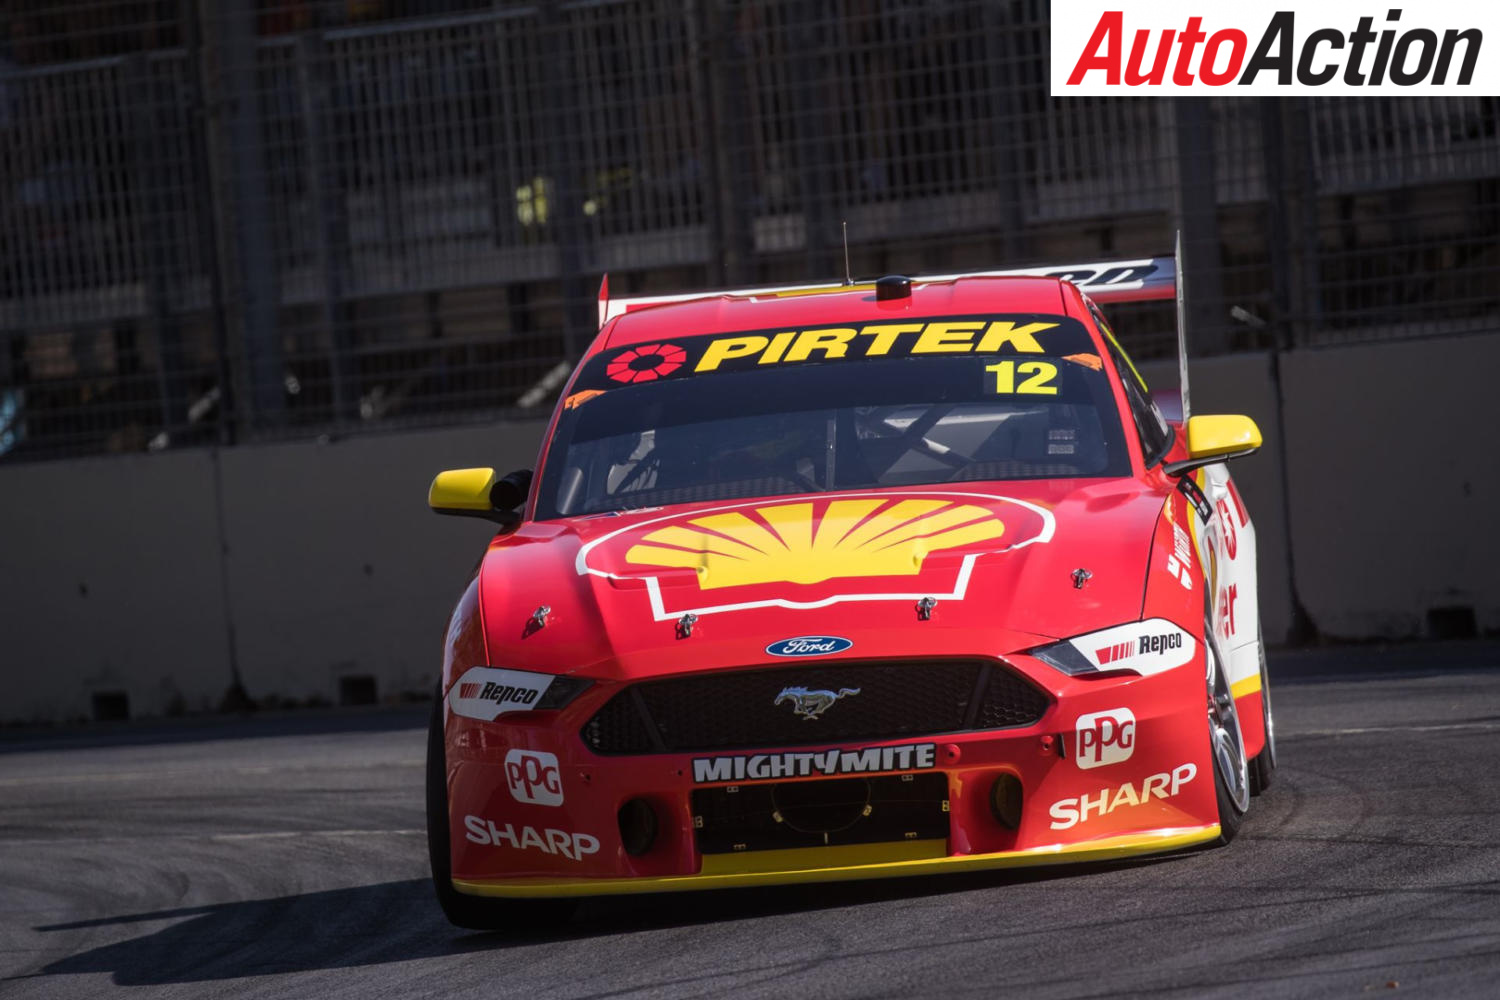 Fabian Coulthard puts Mustang on pole for Adelaide opener - Photo: InSyde Media